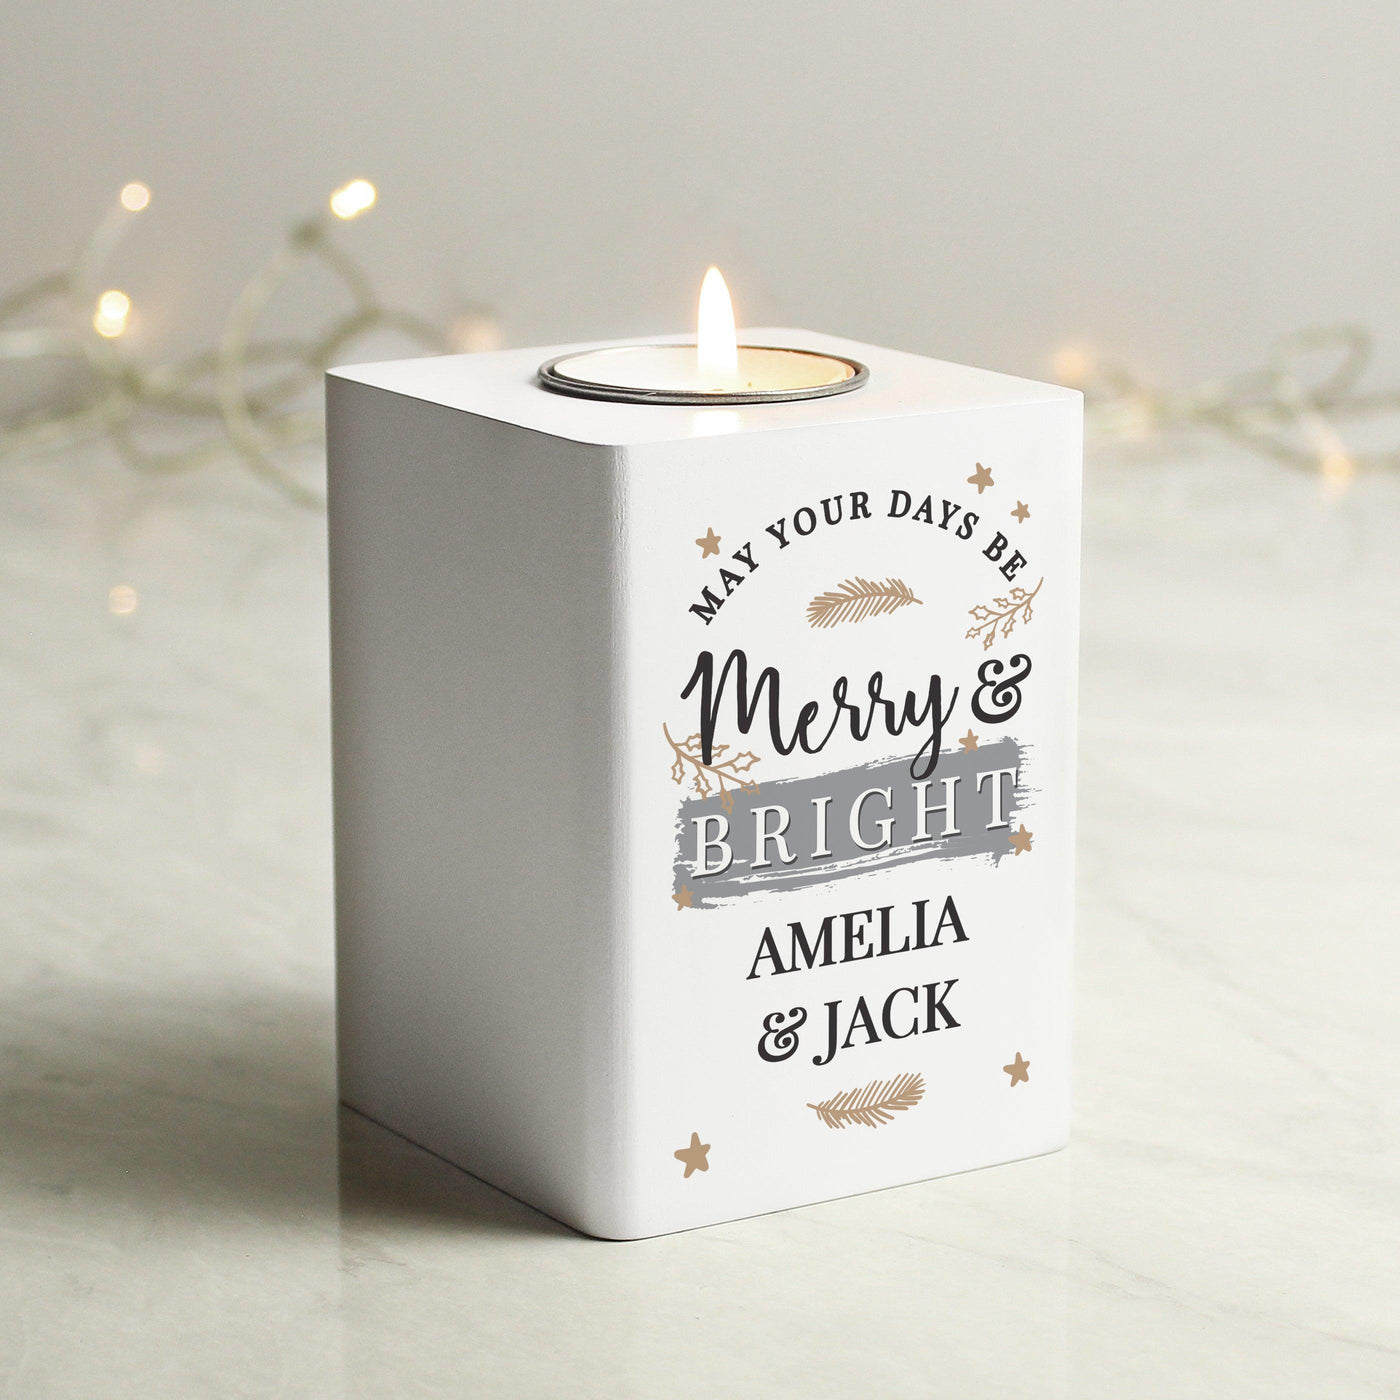 Personalised Merry & Bright White Wooden Tea light Holder - Shop Personalised Gifts